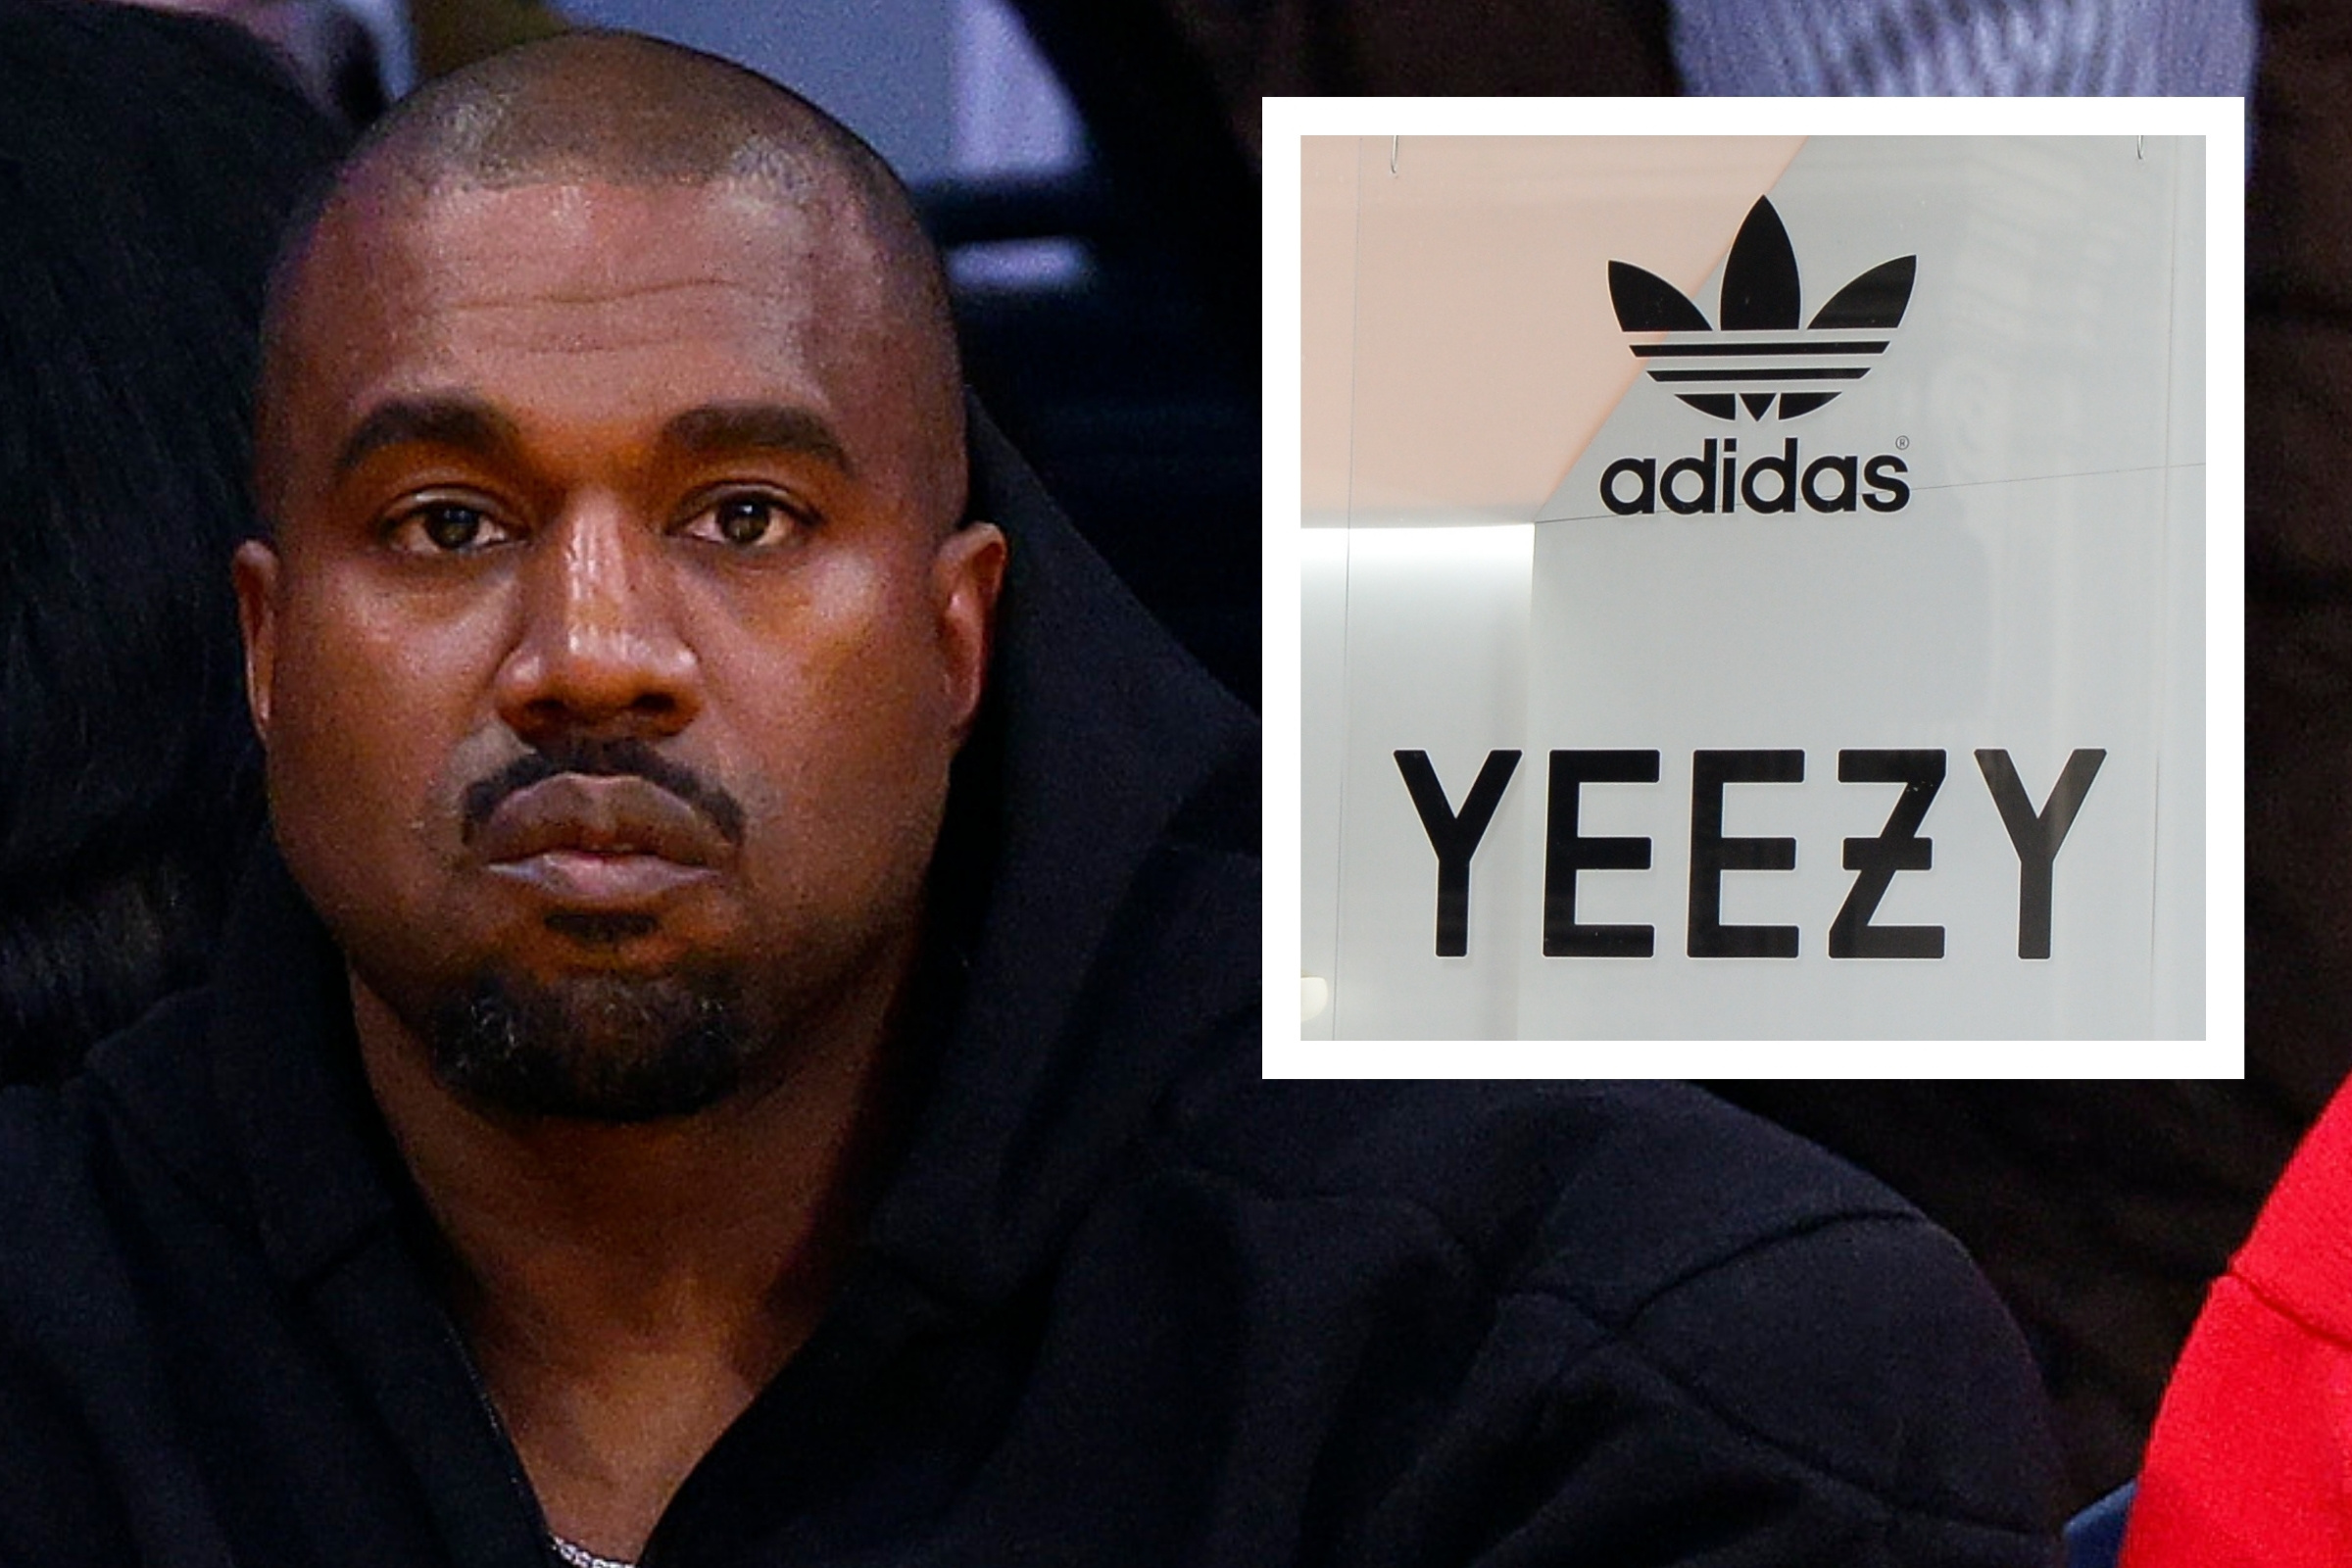 Kanye West (Ye) Drops Off Forbes Billionaires' List as Adidas Cuts Ties -  Bloomberg